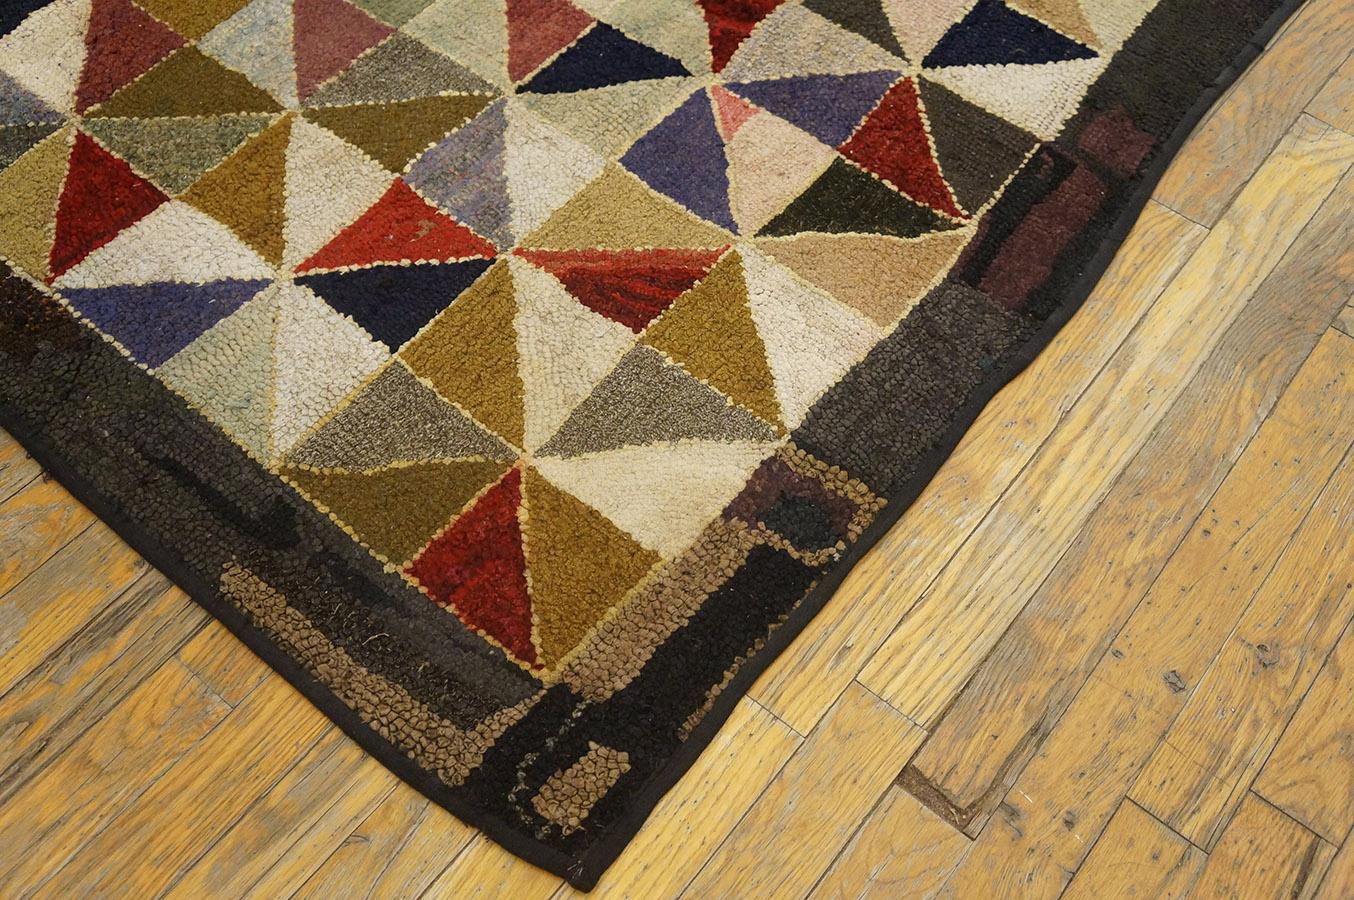 Mid-20th Century Early 20th Century American Hooked Rug ( 6' x 6' - 183 x 183 cm ) For Sale